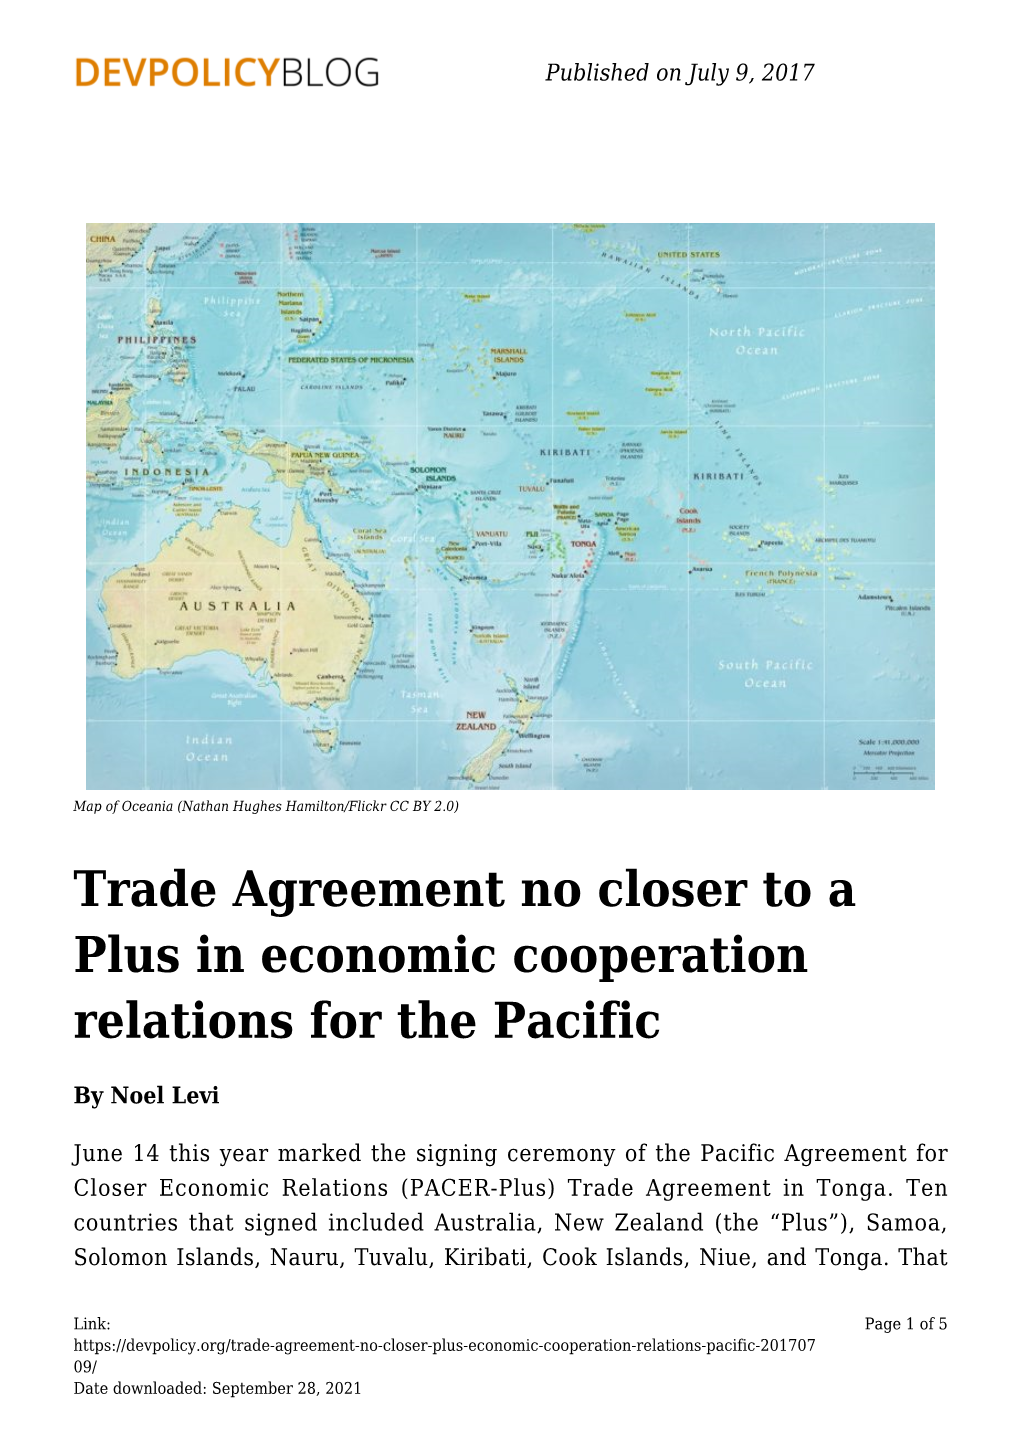 Trade Agreement No Closer to a Plus in Economic Cooperation Relations for the Pacific